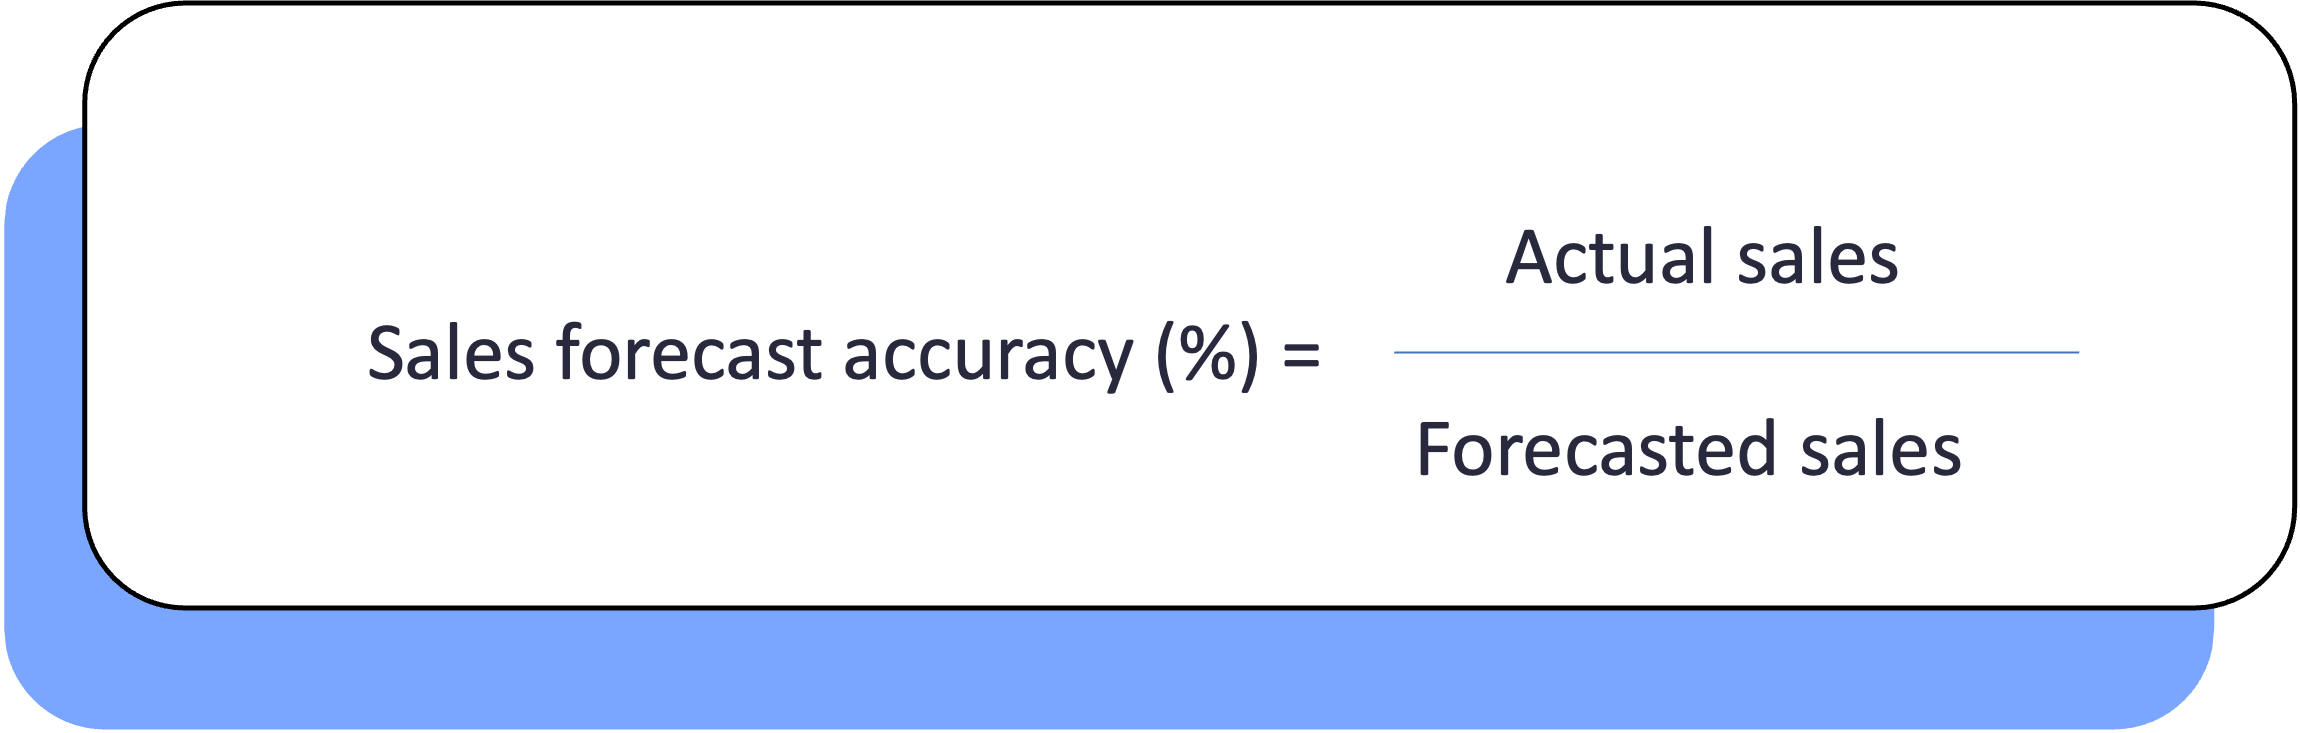 sales forecast accuracy